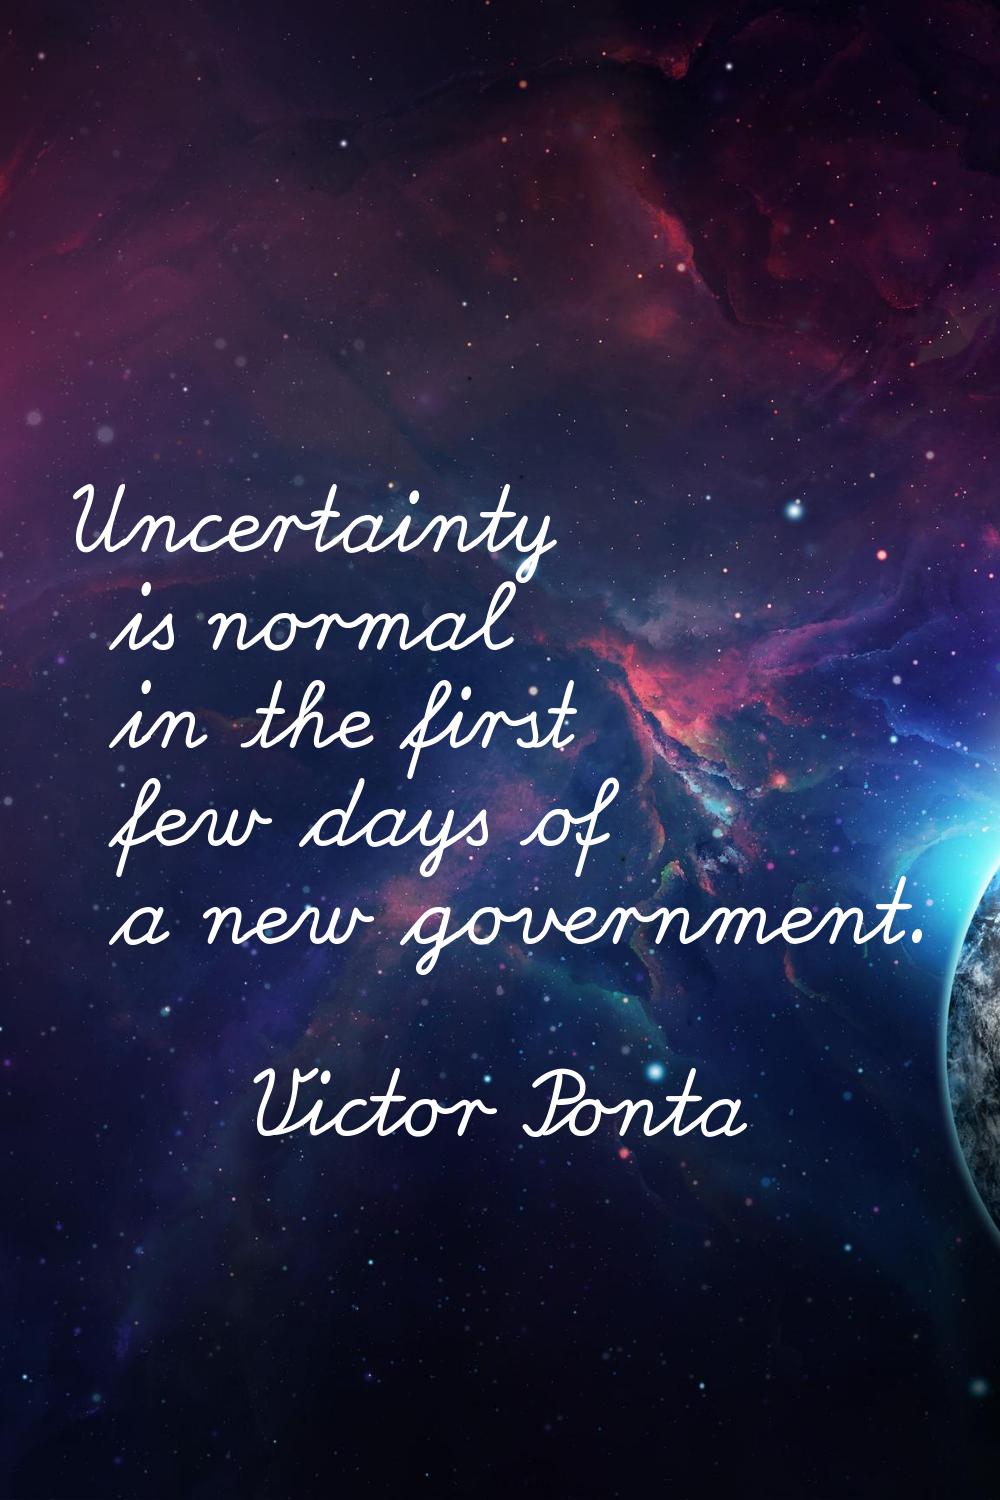 Uncertainty is normal in the first few days of a new government.